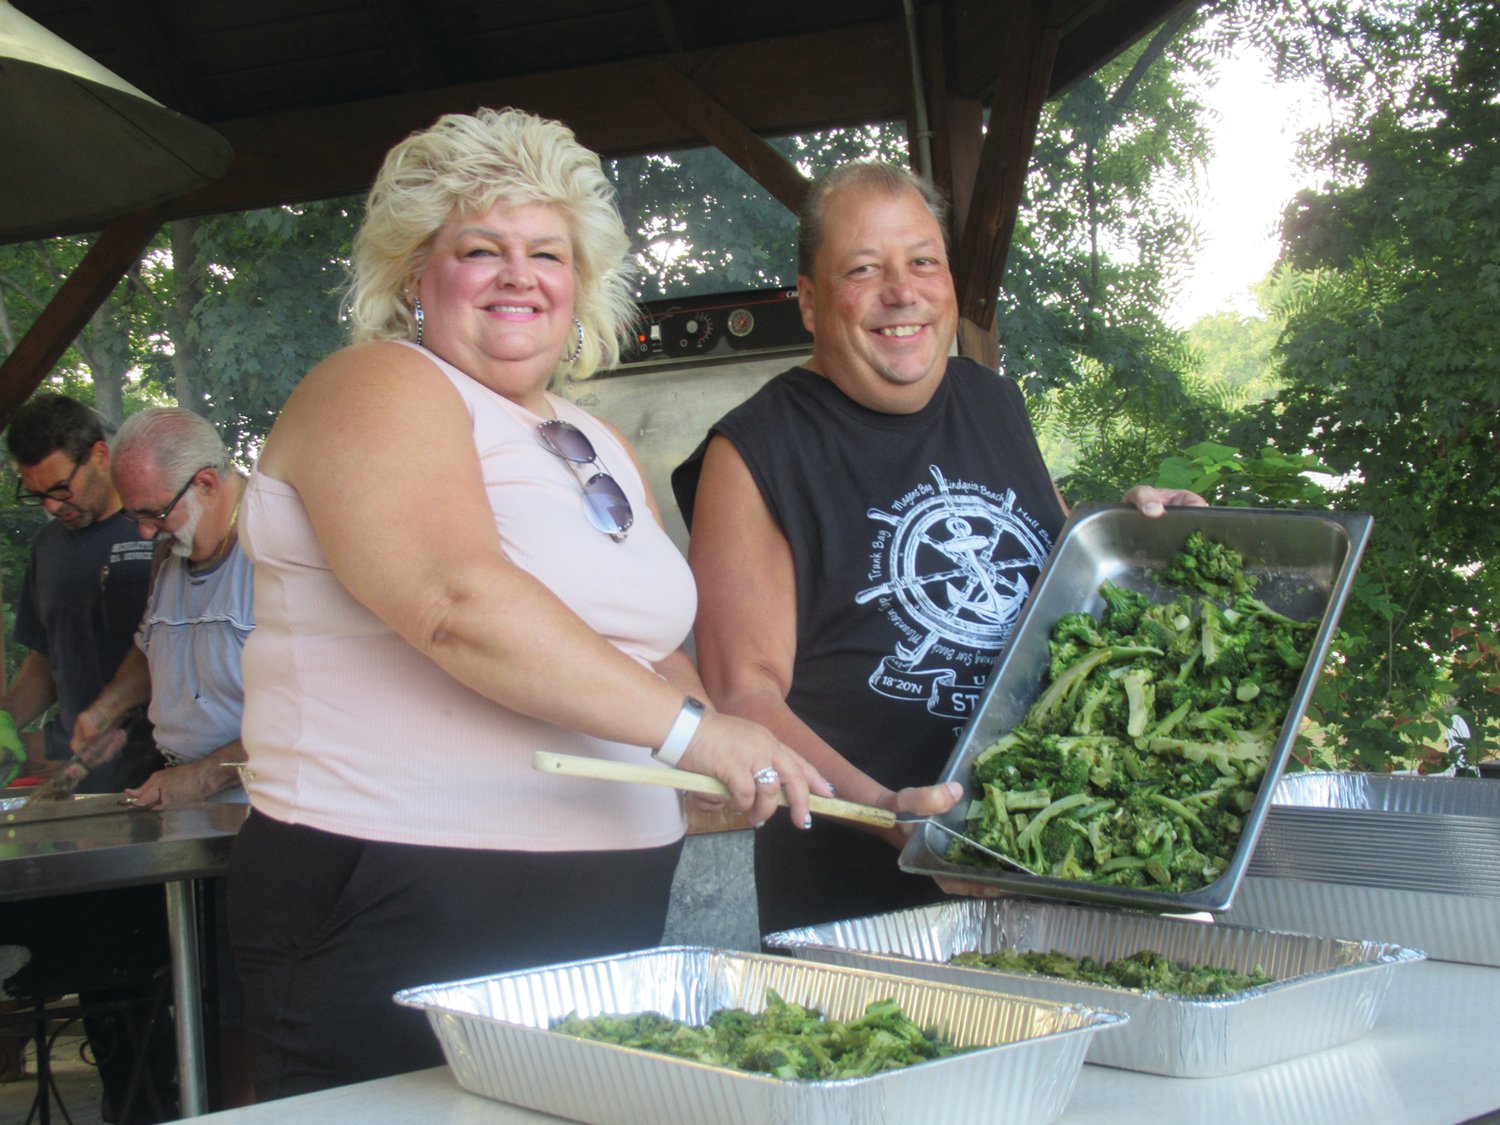 DELICIOUS DISH: Michelle Lanciaux and Jacob Whitford scoop heaping pans filled with freshly cooked broccoli that people enjoyed Saturday night at OLG in Johnston.